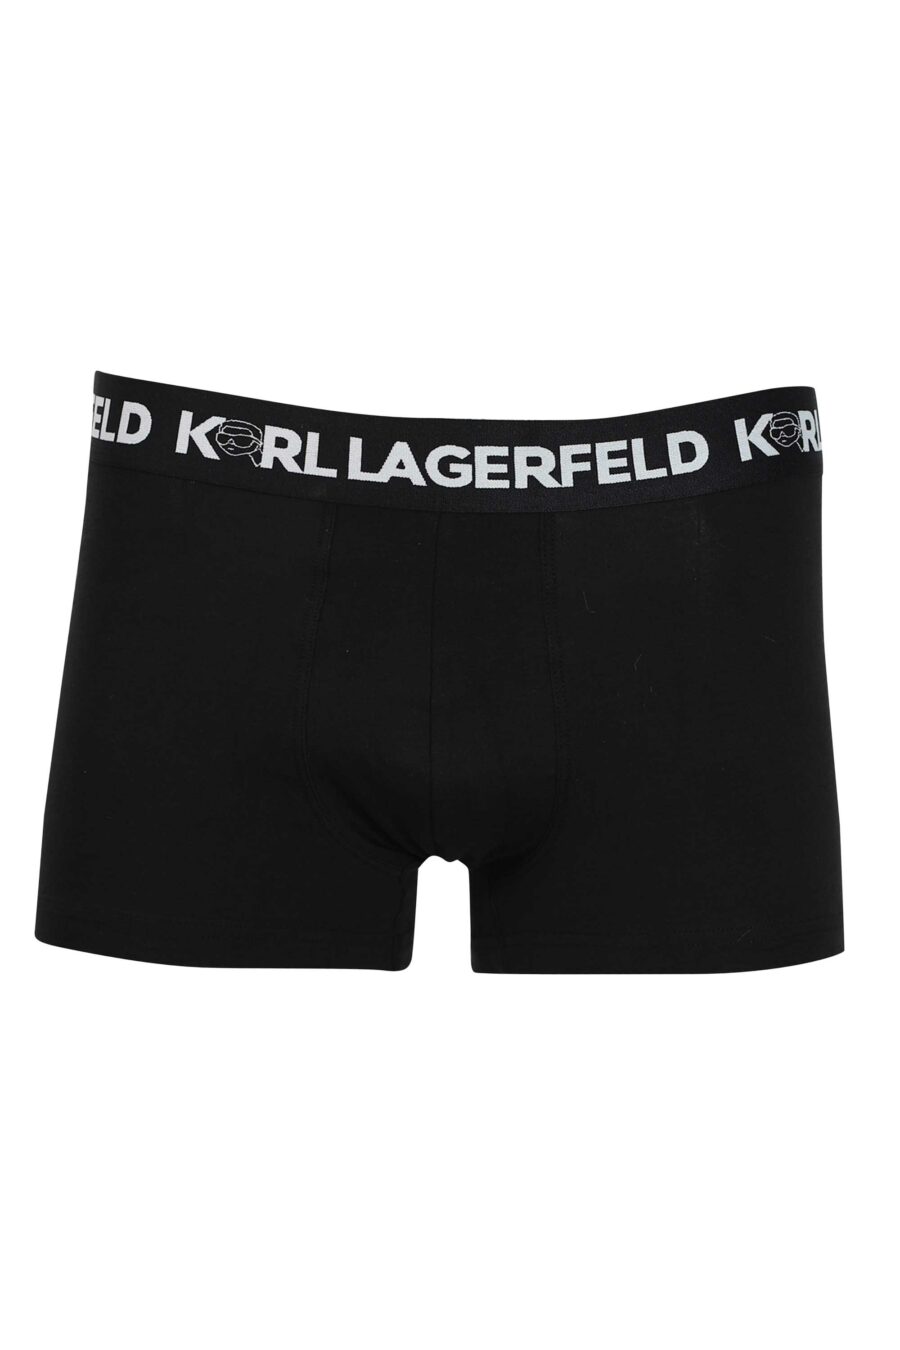 Pack of three black boxers with different "karl" prints - 8720744054580